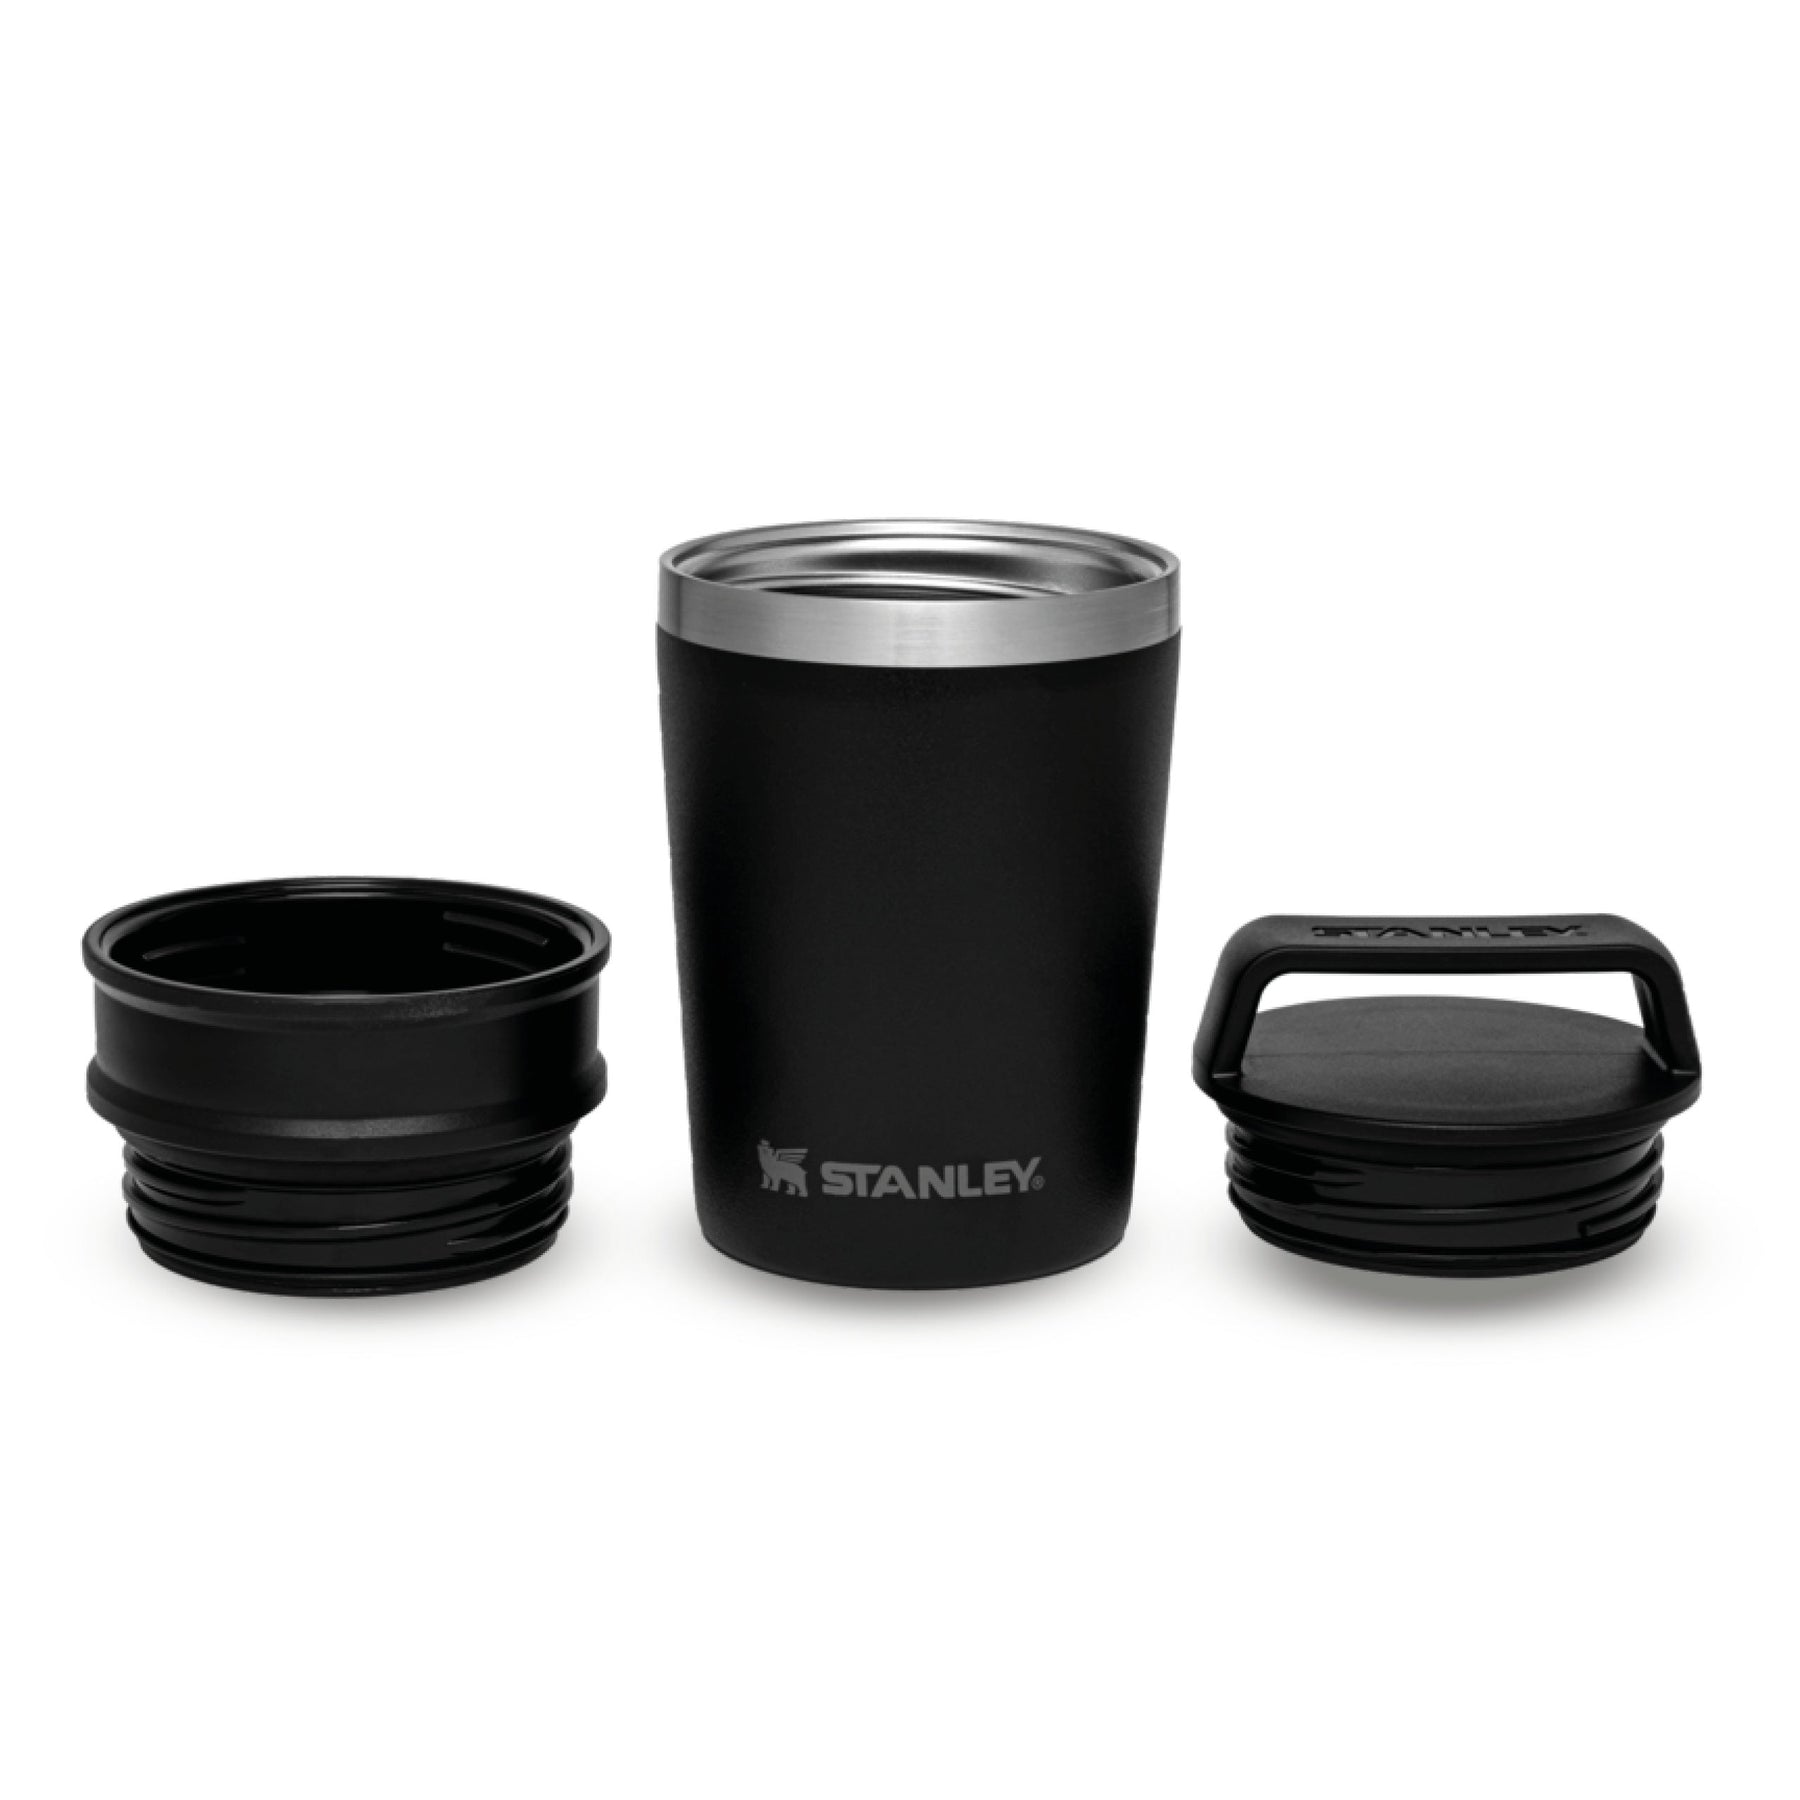 Stanley Classic Trigger Action Travel Mug Review - Alex Kwa